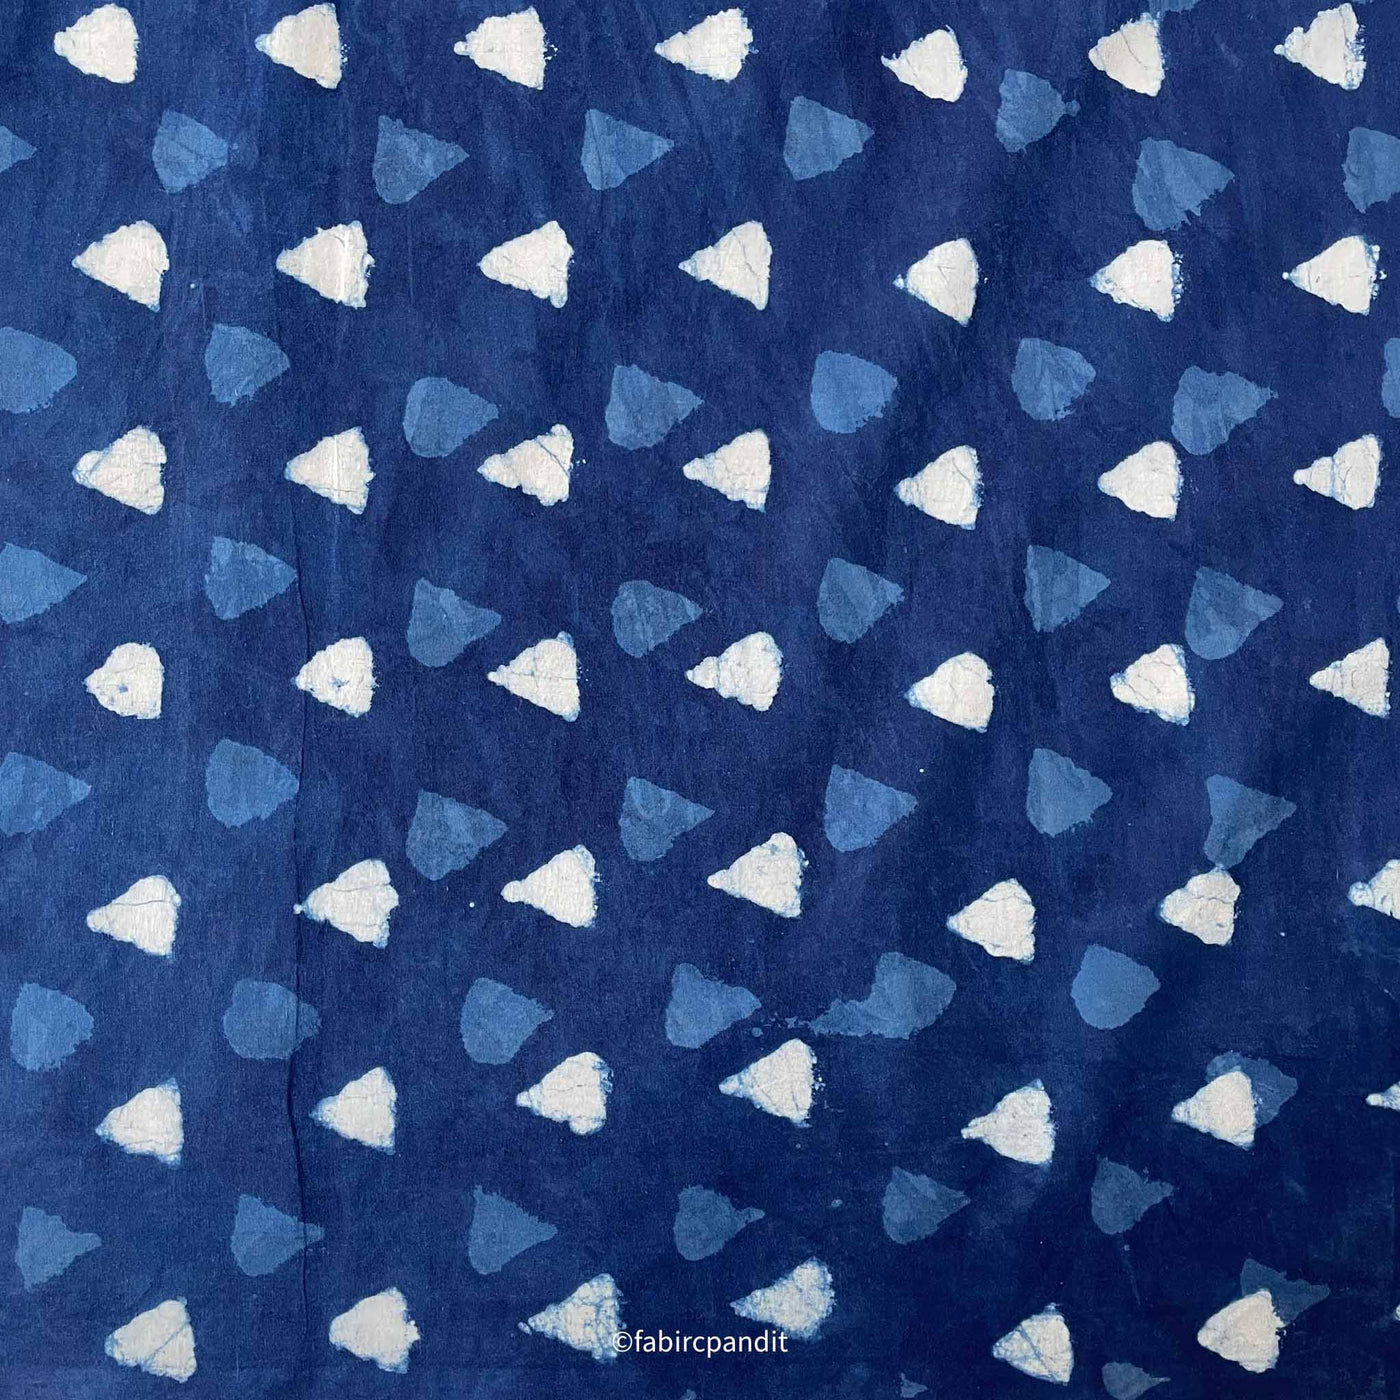 Fabric Pandit Cut Piece (CUT PIECE) Indigo Dabu Natural Dyed White and Blue Triangles Hand Block Printed Pure Cotton Fabric (Width 43 inches)